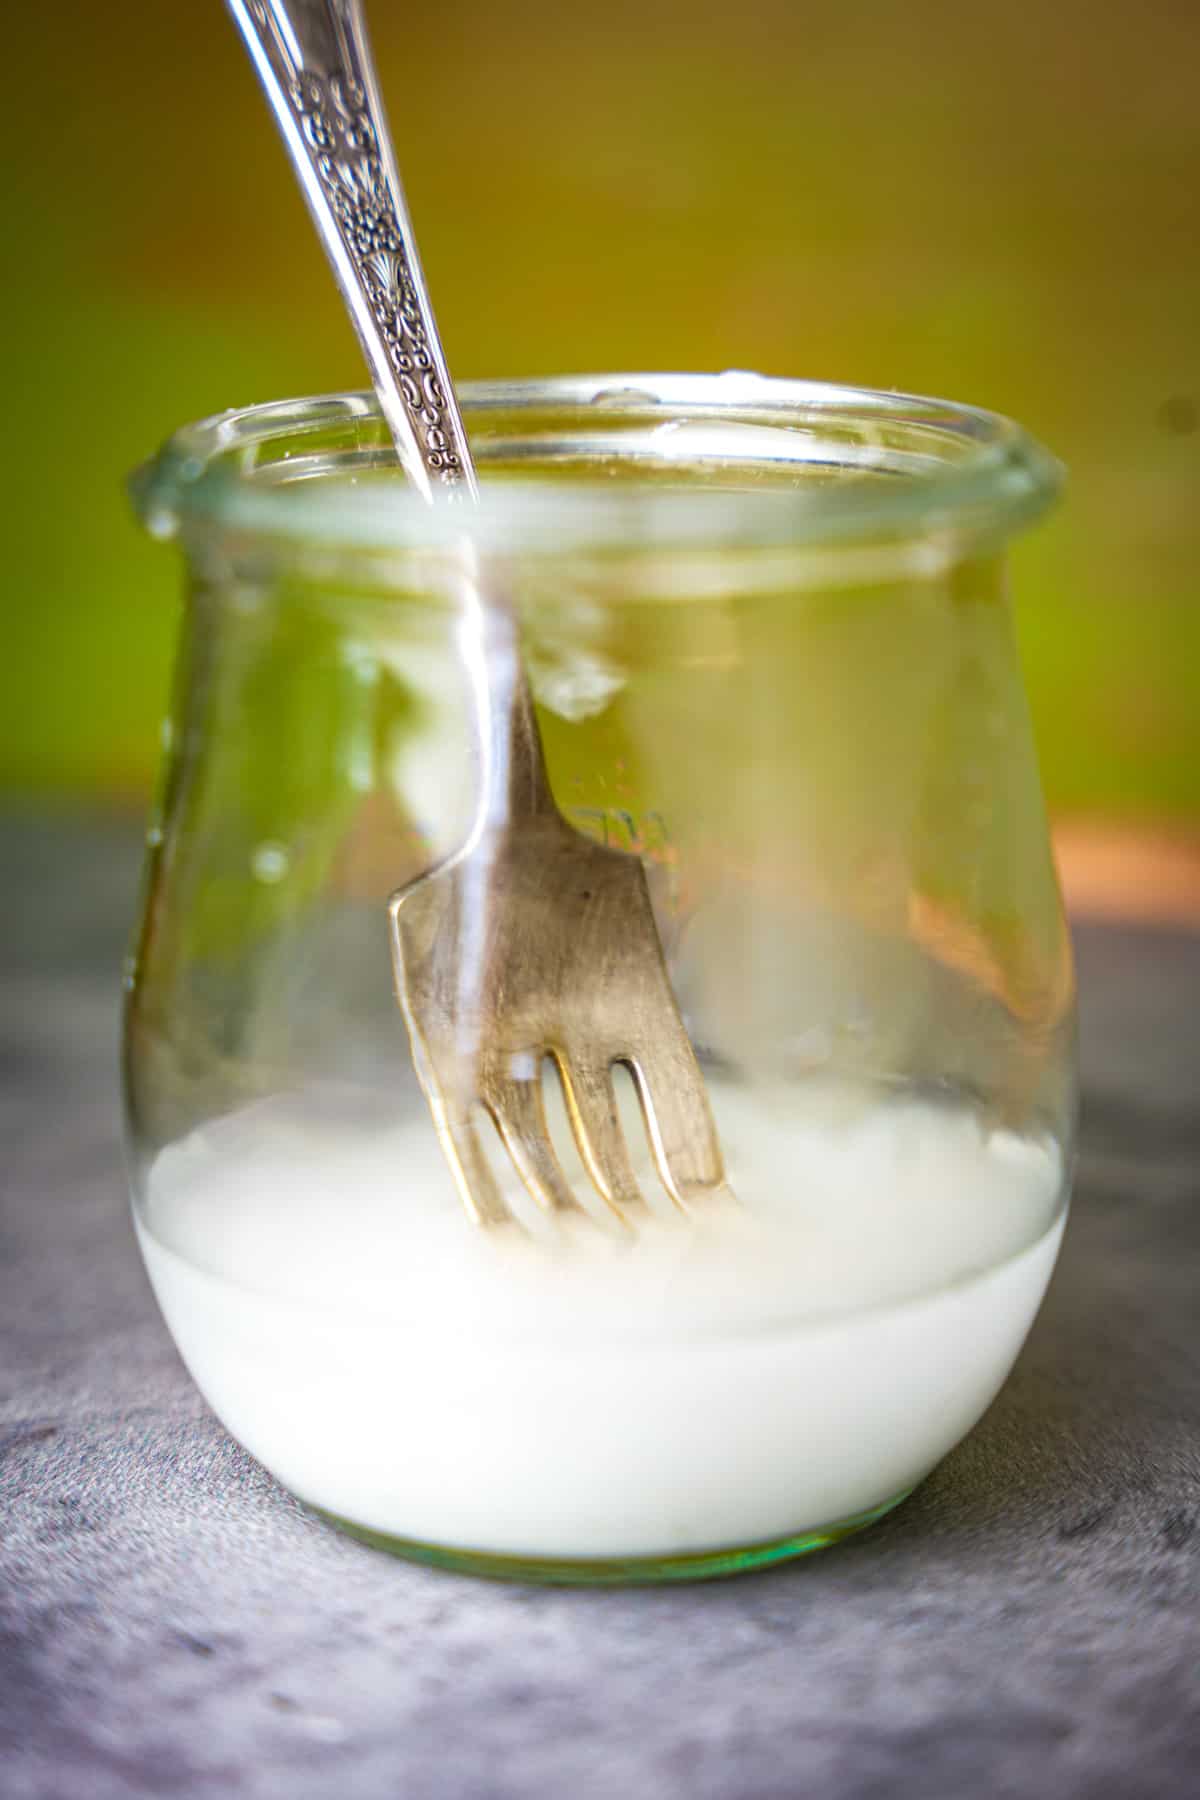 Cornstarch slurry is disolved in a small glass with a fork.